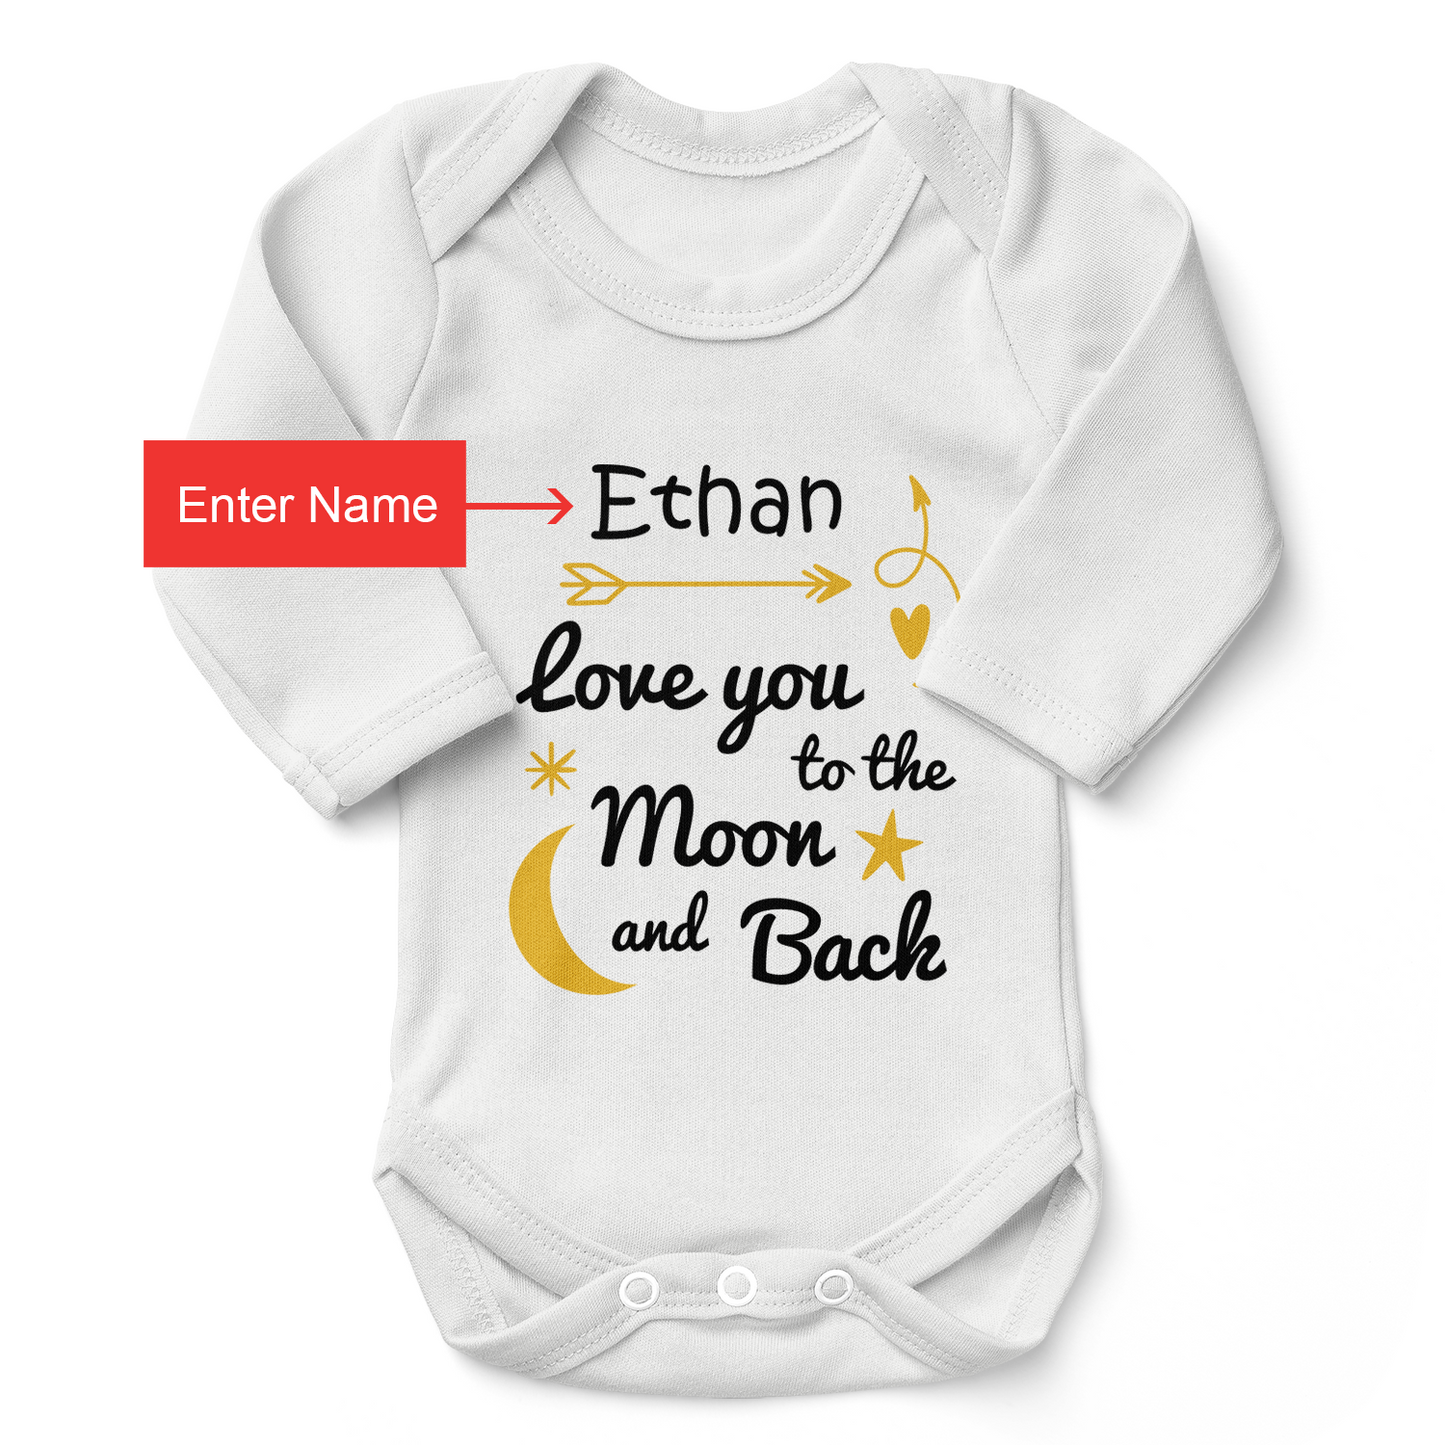 Personalized Organic Baby Bodysuit - Love You To The Moon & Back (White / Long Sleeve)